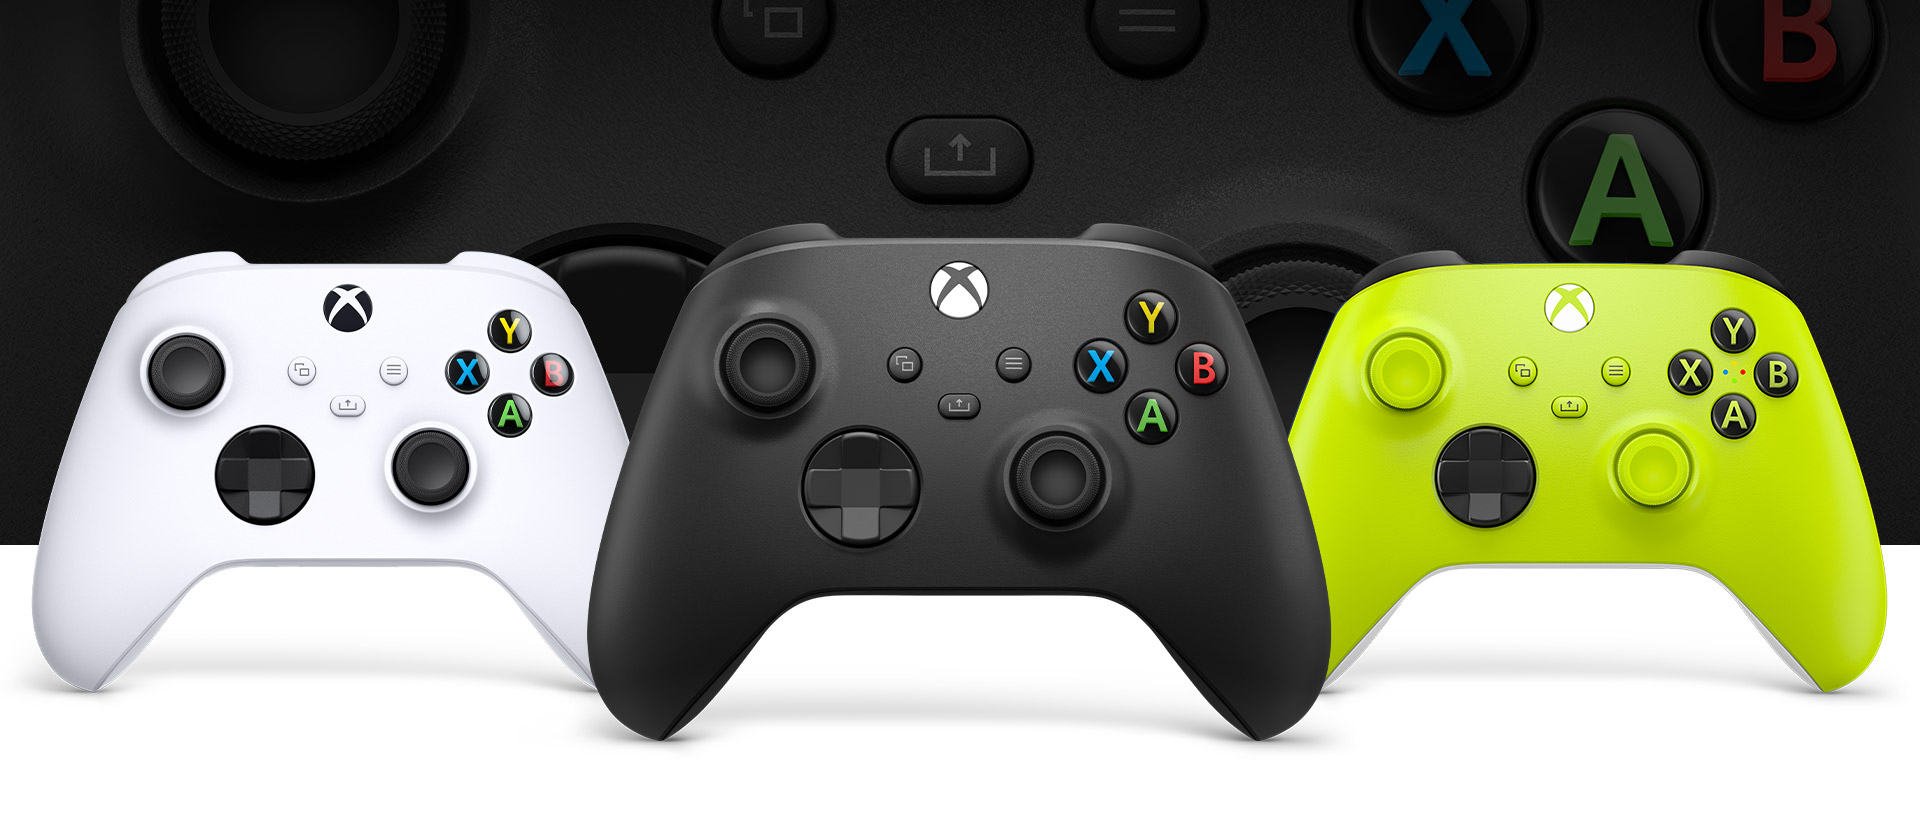 The 3 BEST controllers that you can buy for your Xbox